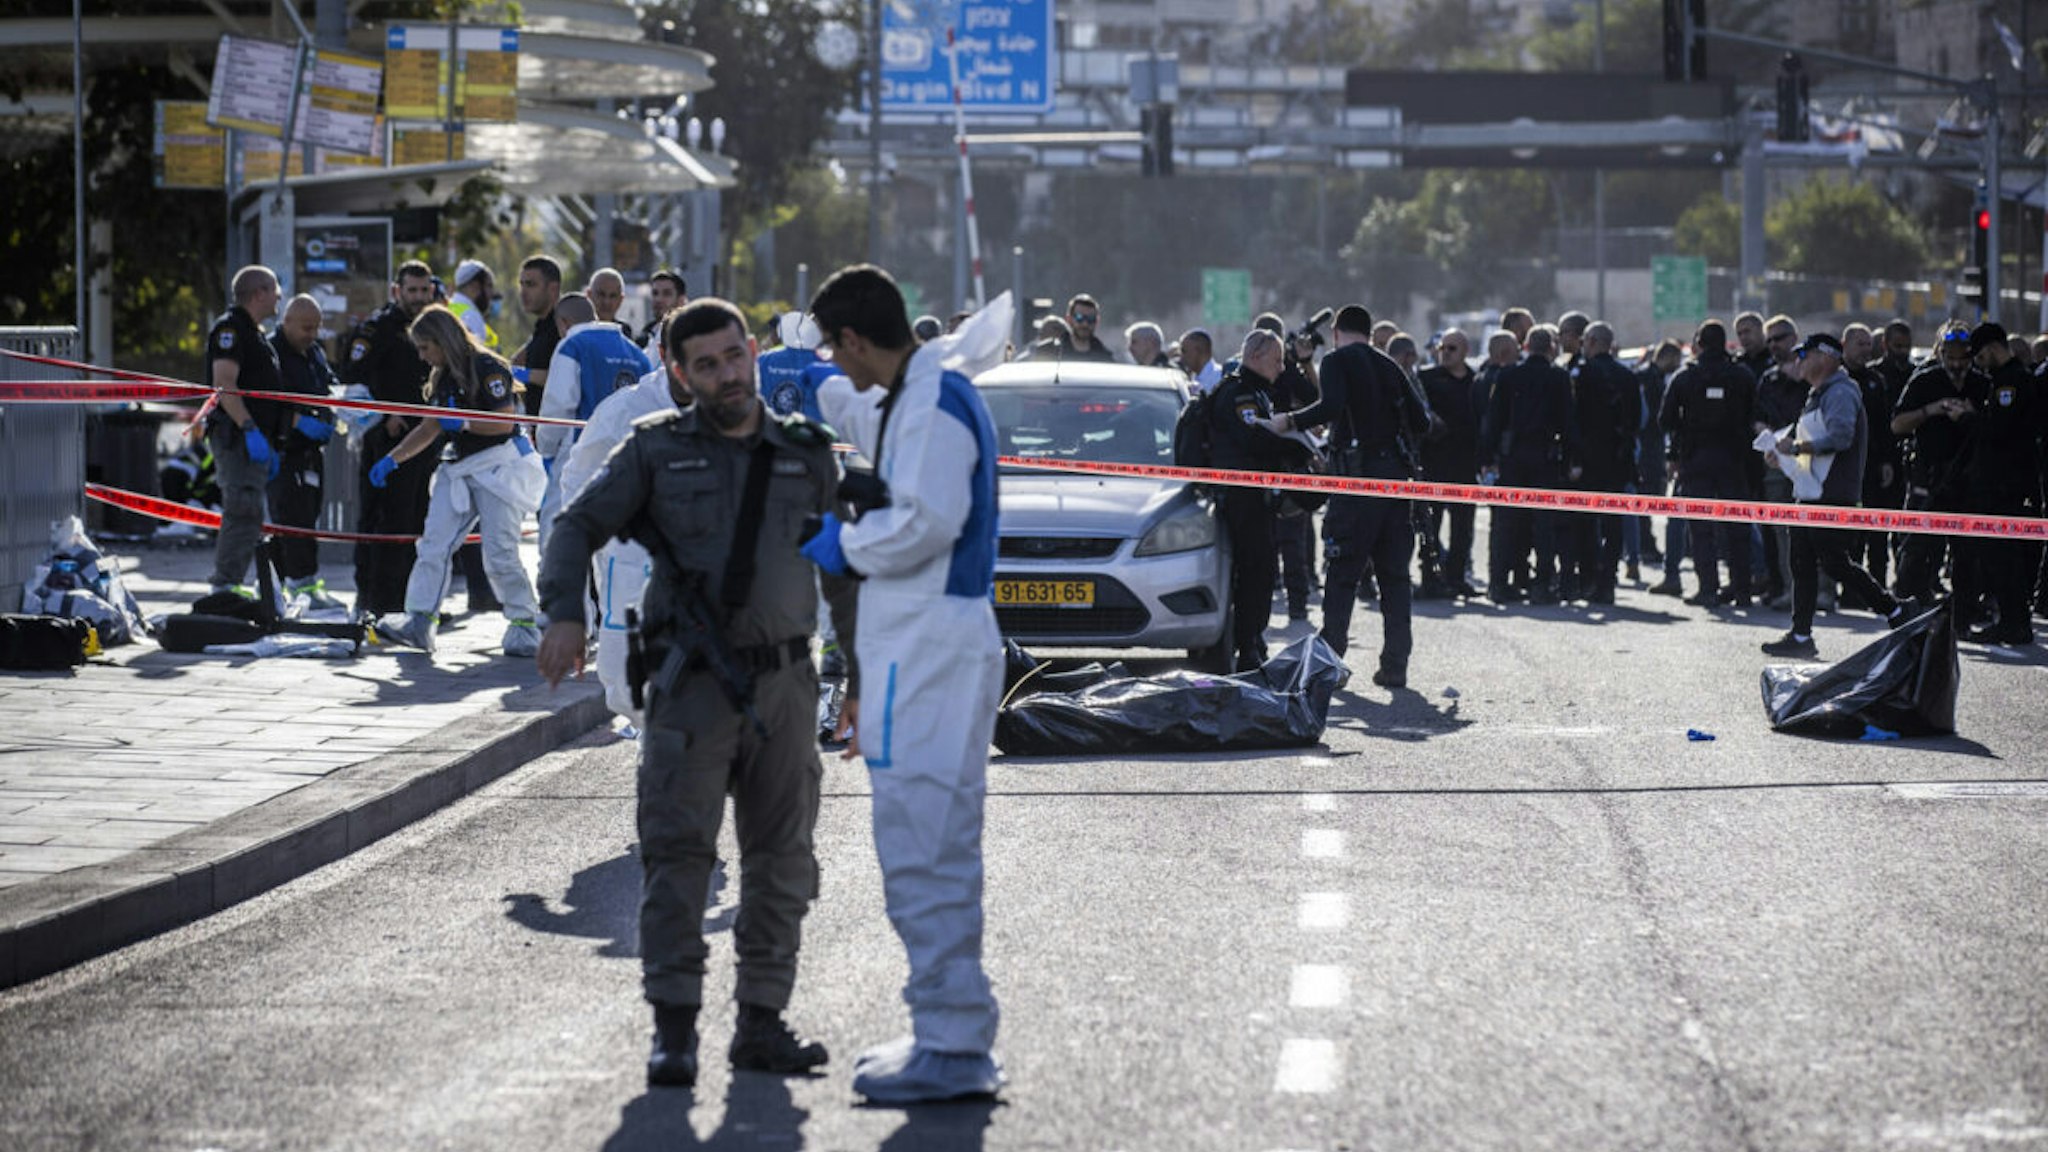 30 November 2023, Israel, Jerusalem: ZAKA International Rescue Unit members and Israeli police officers work at the scene of a shooting attack involving two Palestinian attackers who opened fire on people waiting at a bus stop, killing three people and injuring at least 16 others.